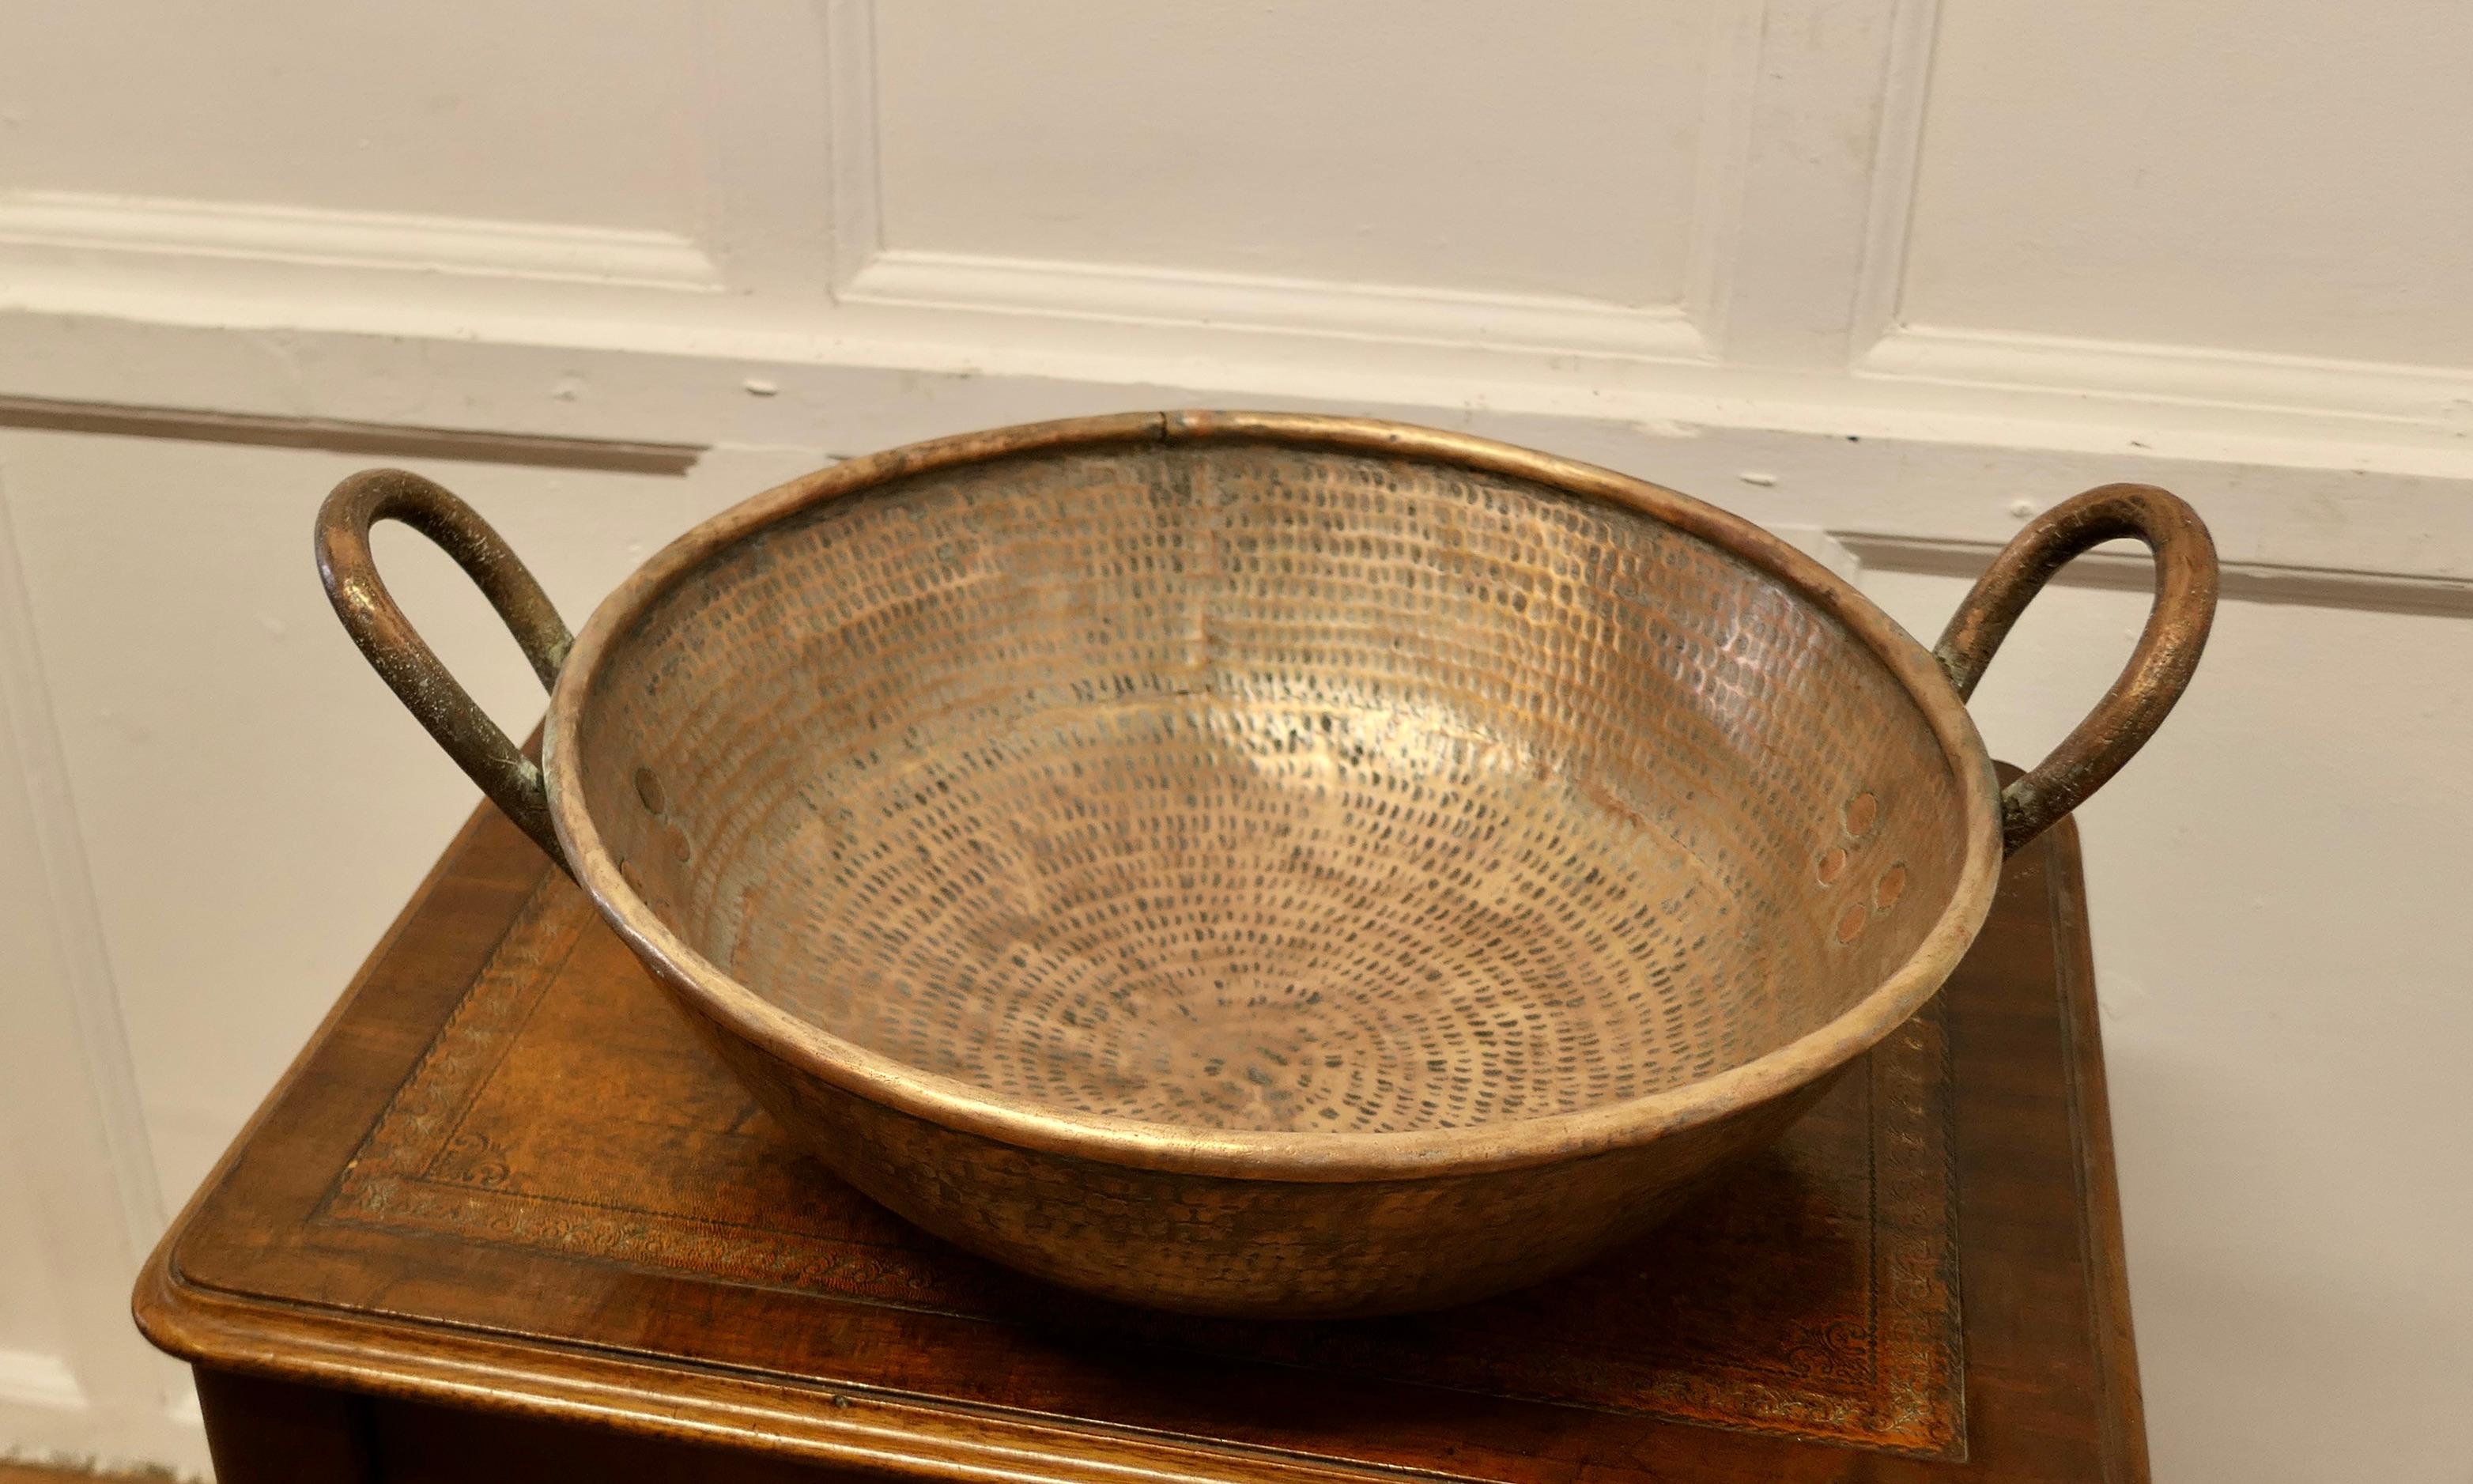 Very Heavy Hand Beaten Brass Dish with Handles

A very heavy and well made piece, the dish has a gentle upward sweep to the edges, and it has a rolled top and very thick strong riveted handles
The dish is 9” high to the top of the handles and 17”